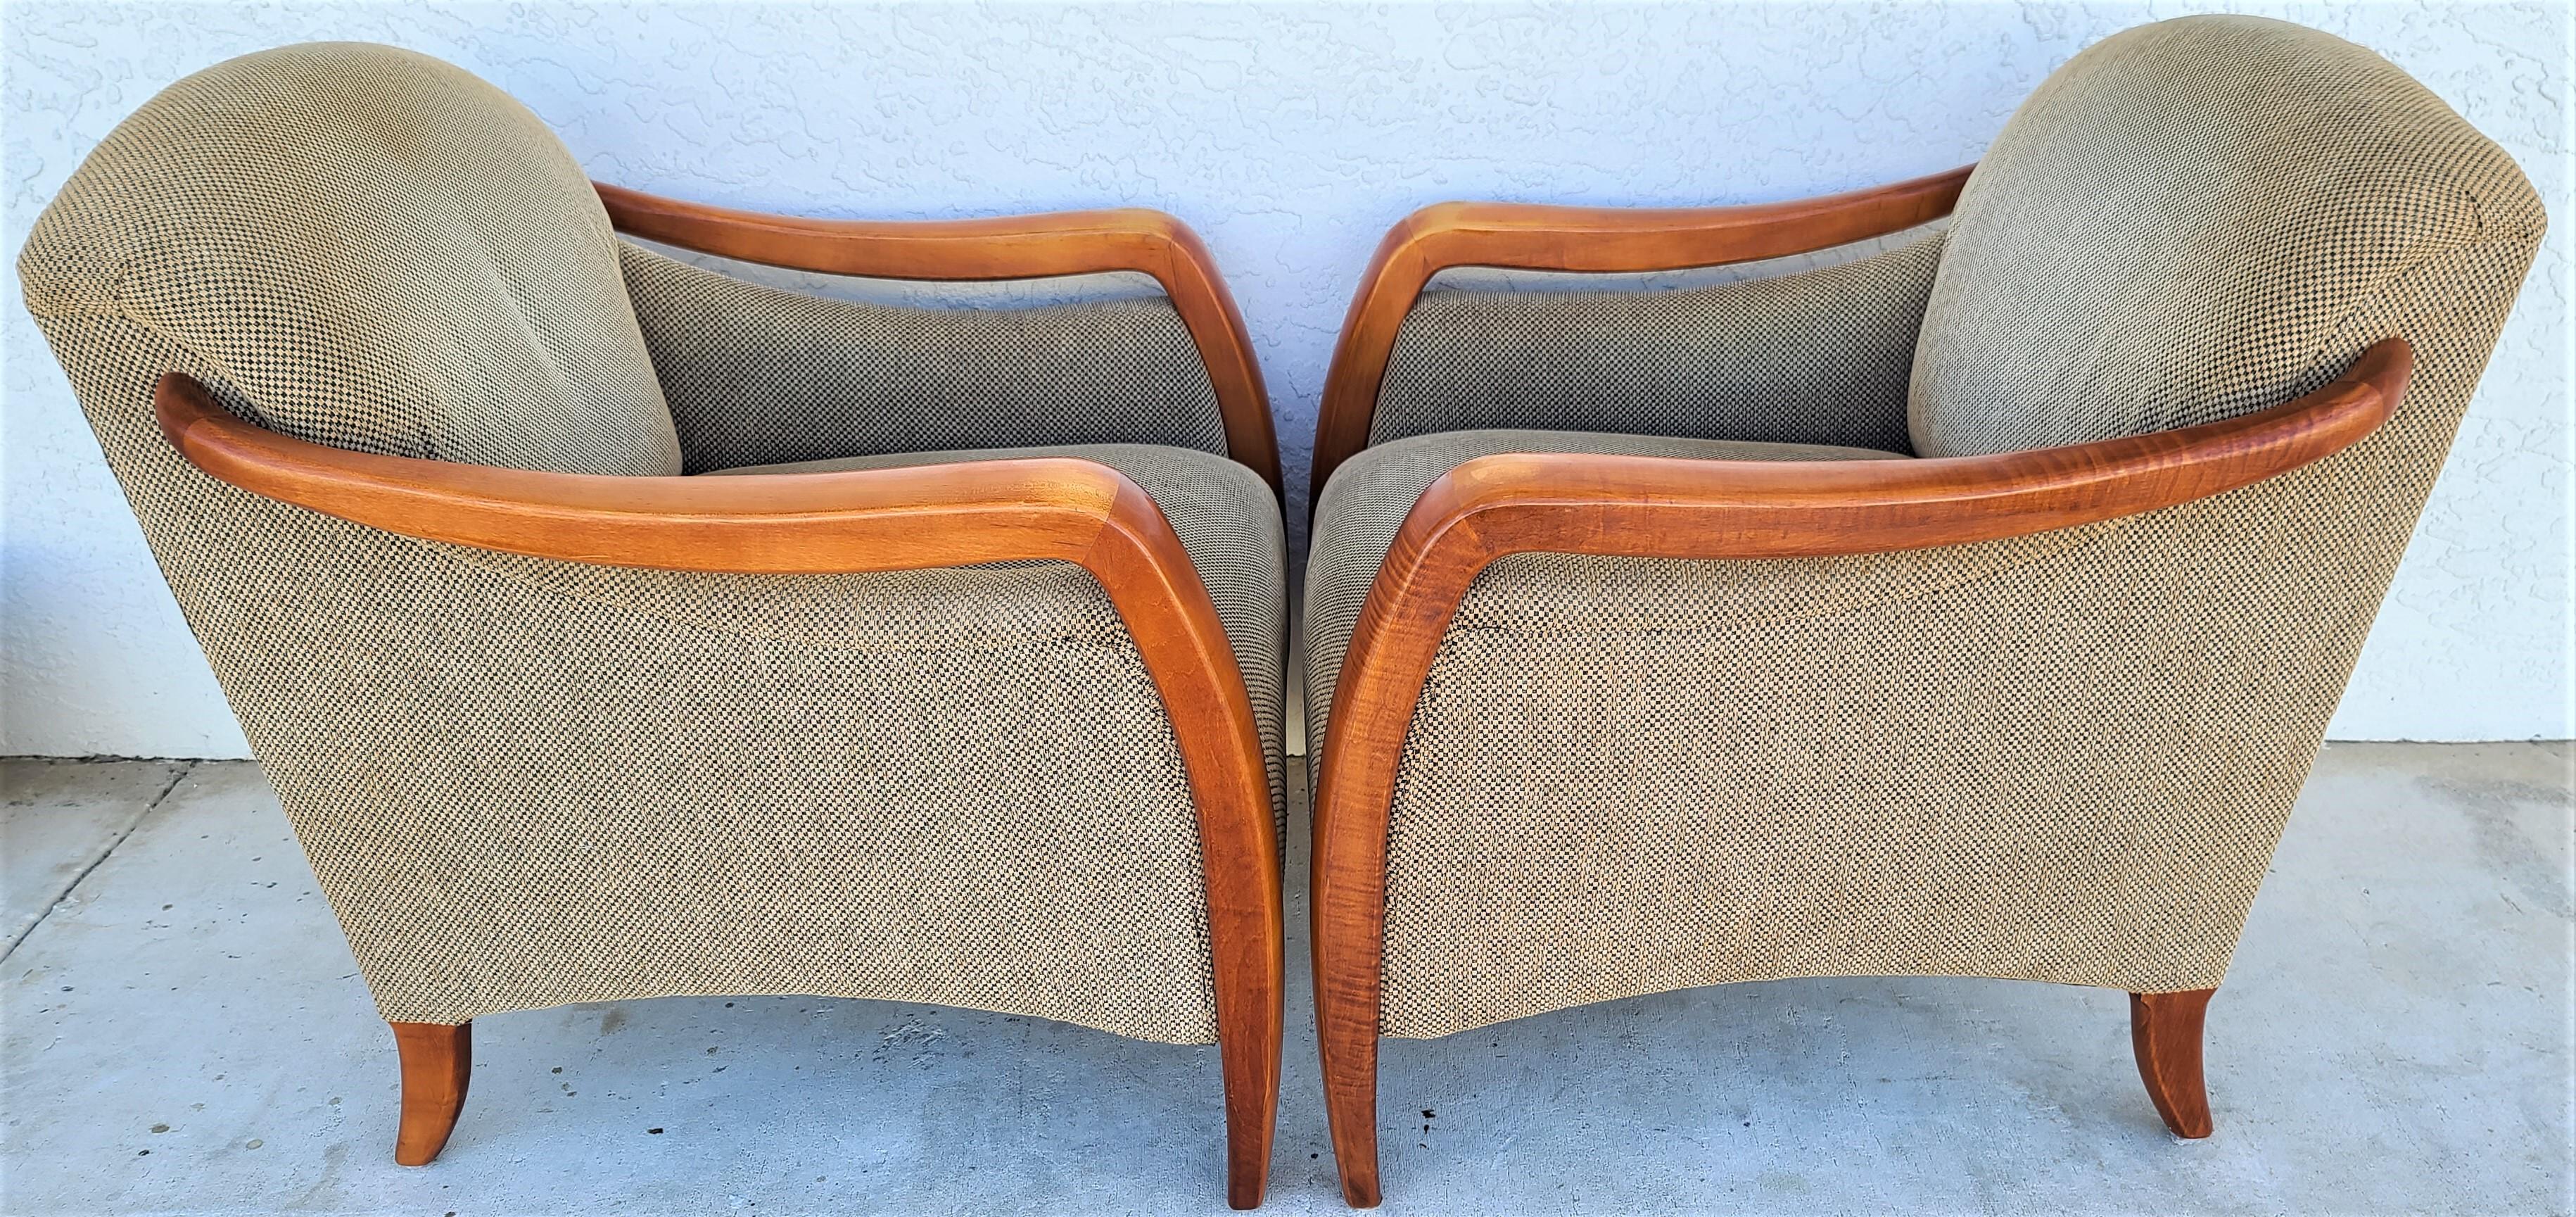 Cotton Spectacular Pair of Mid-Century Modern Upholstered Lounge Chairs